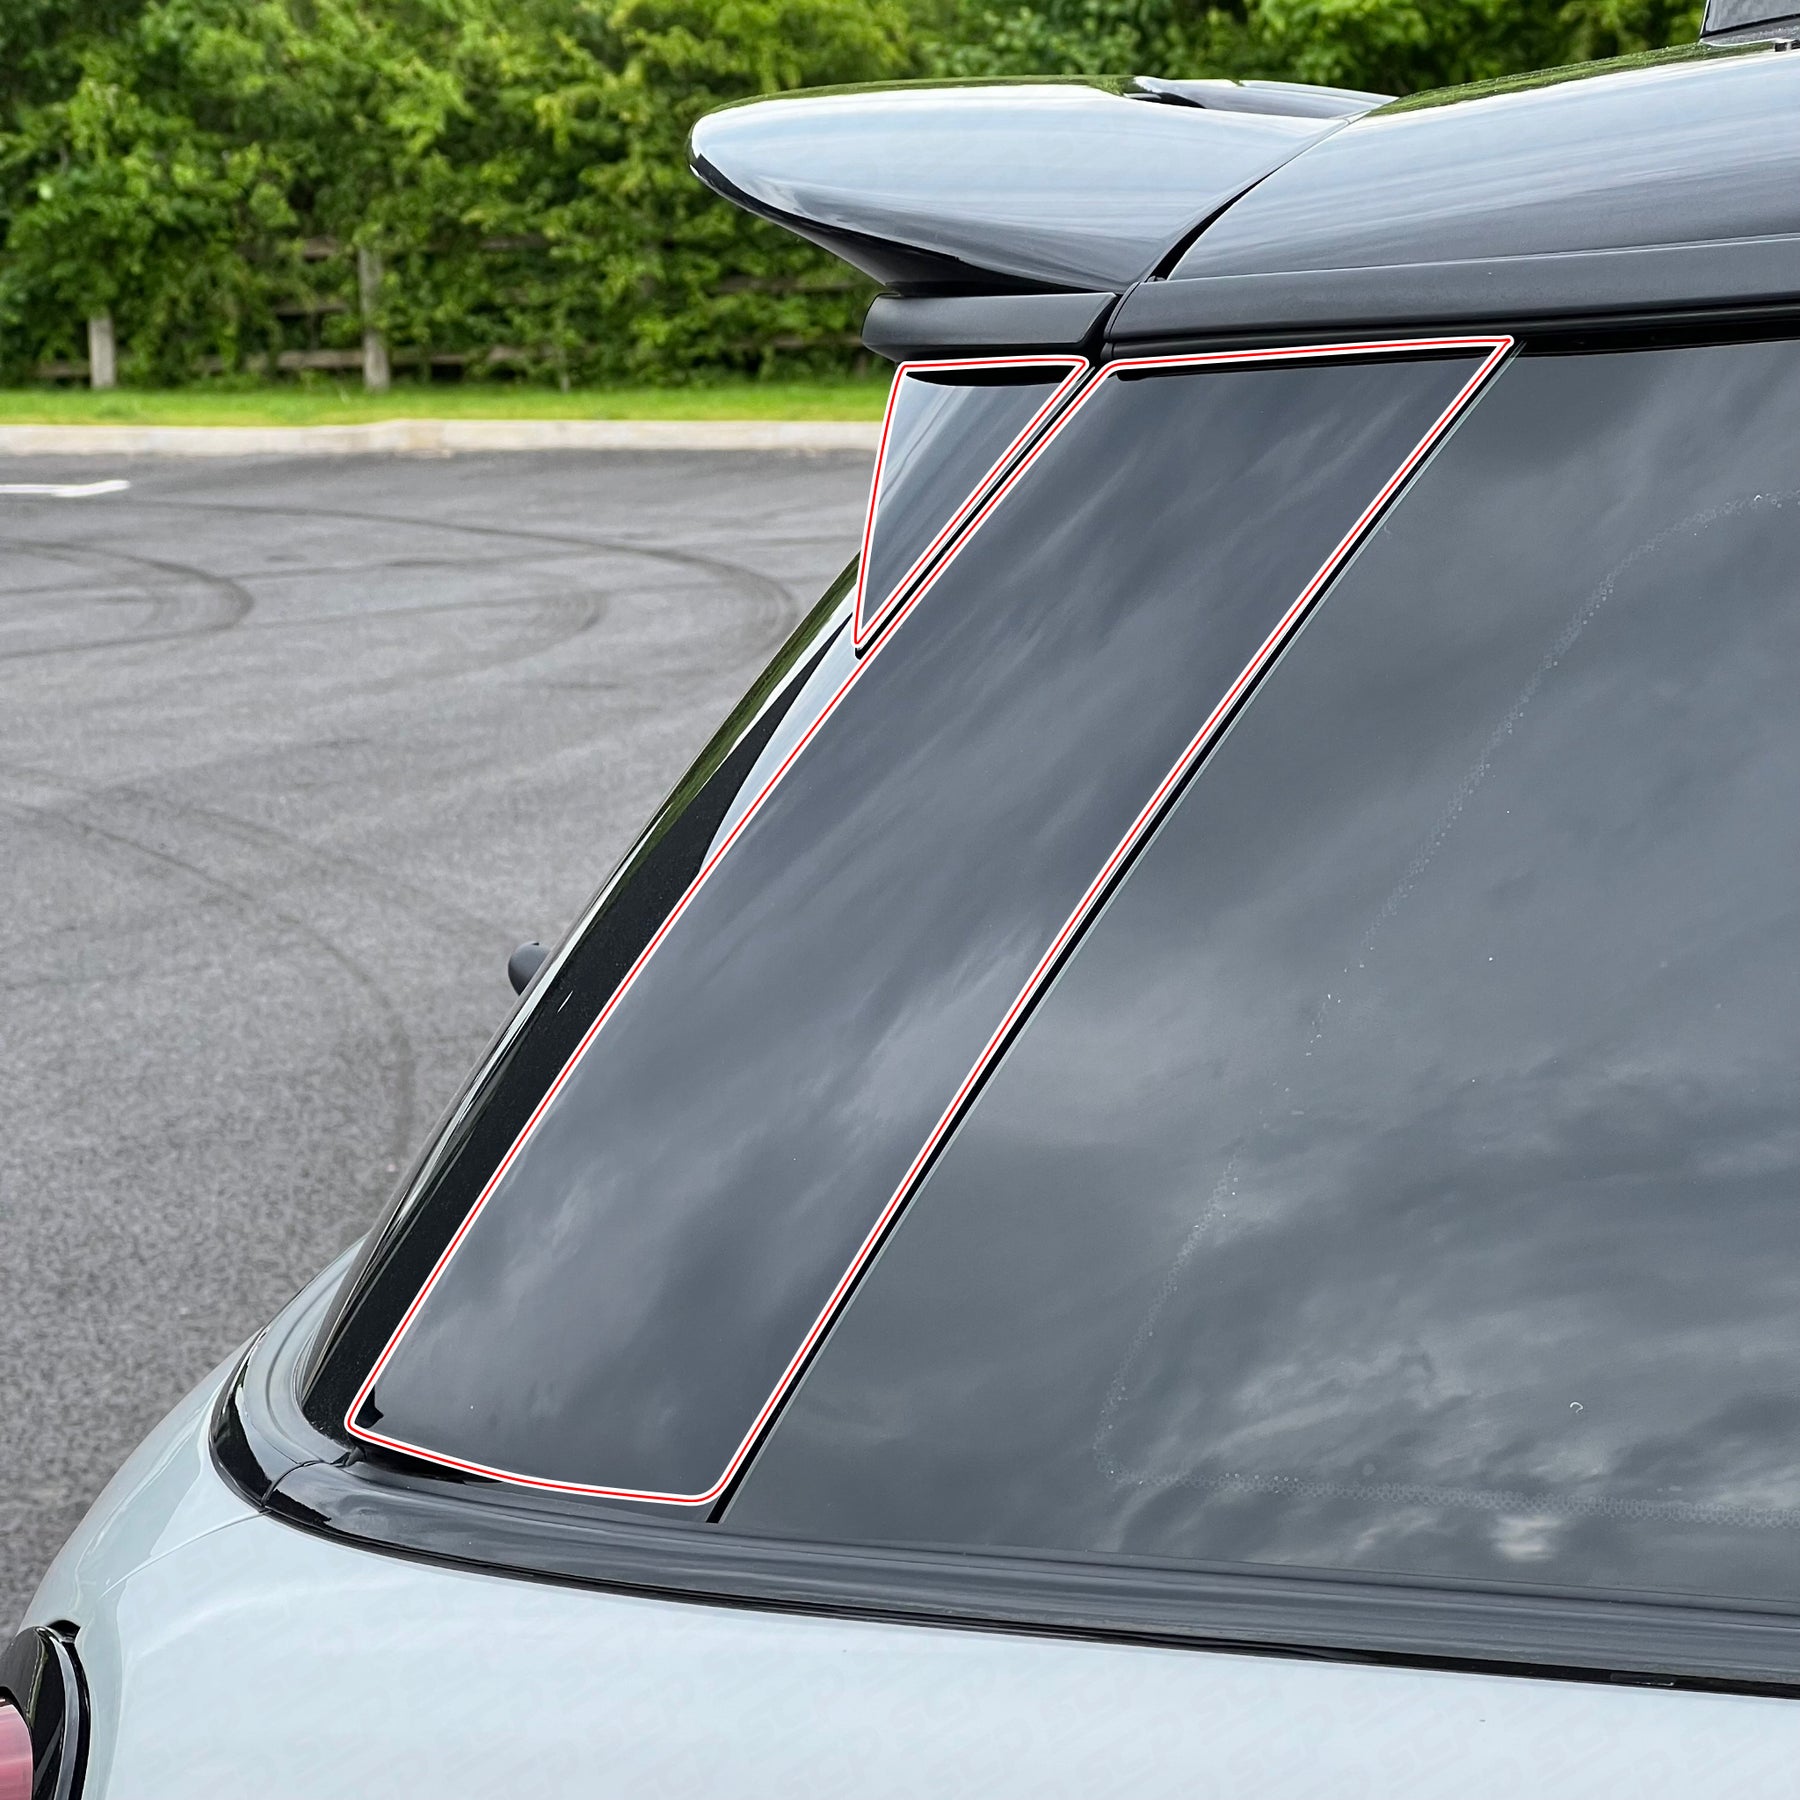 View the XPEL paint protection film coverage options